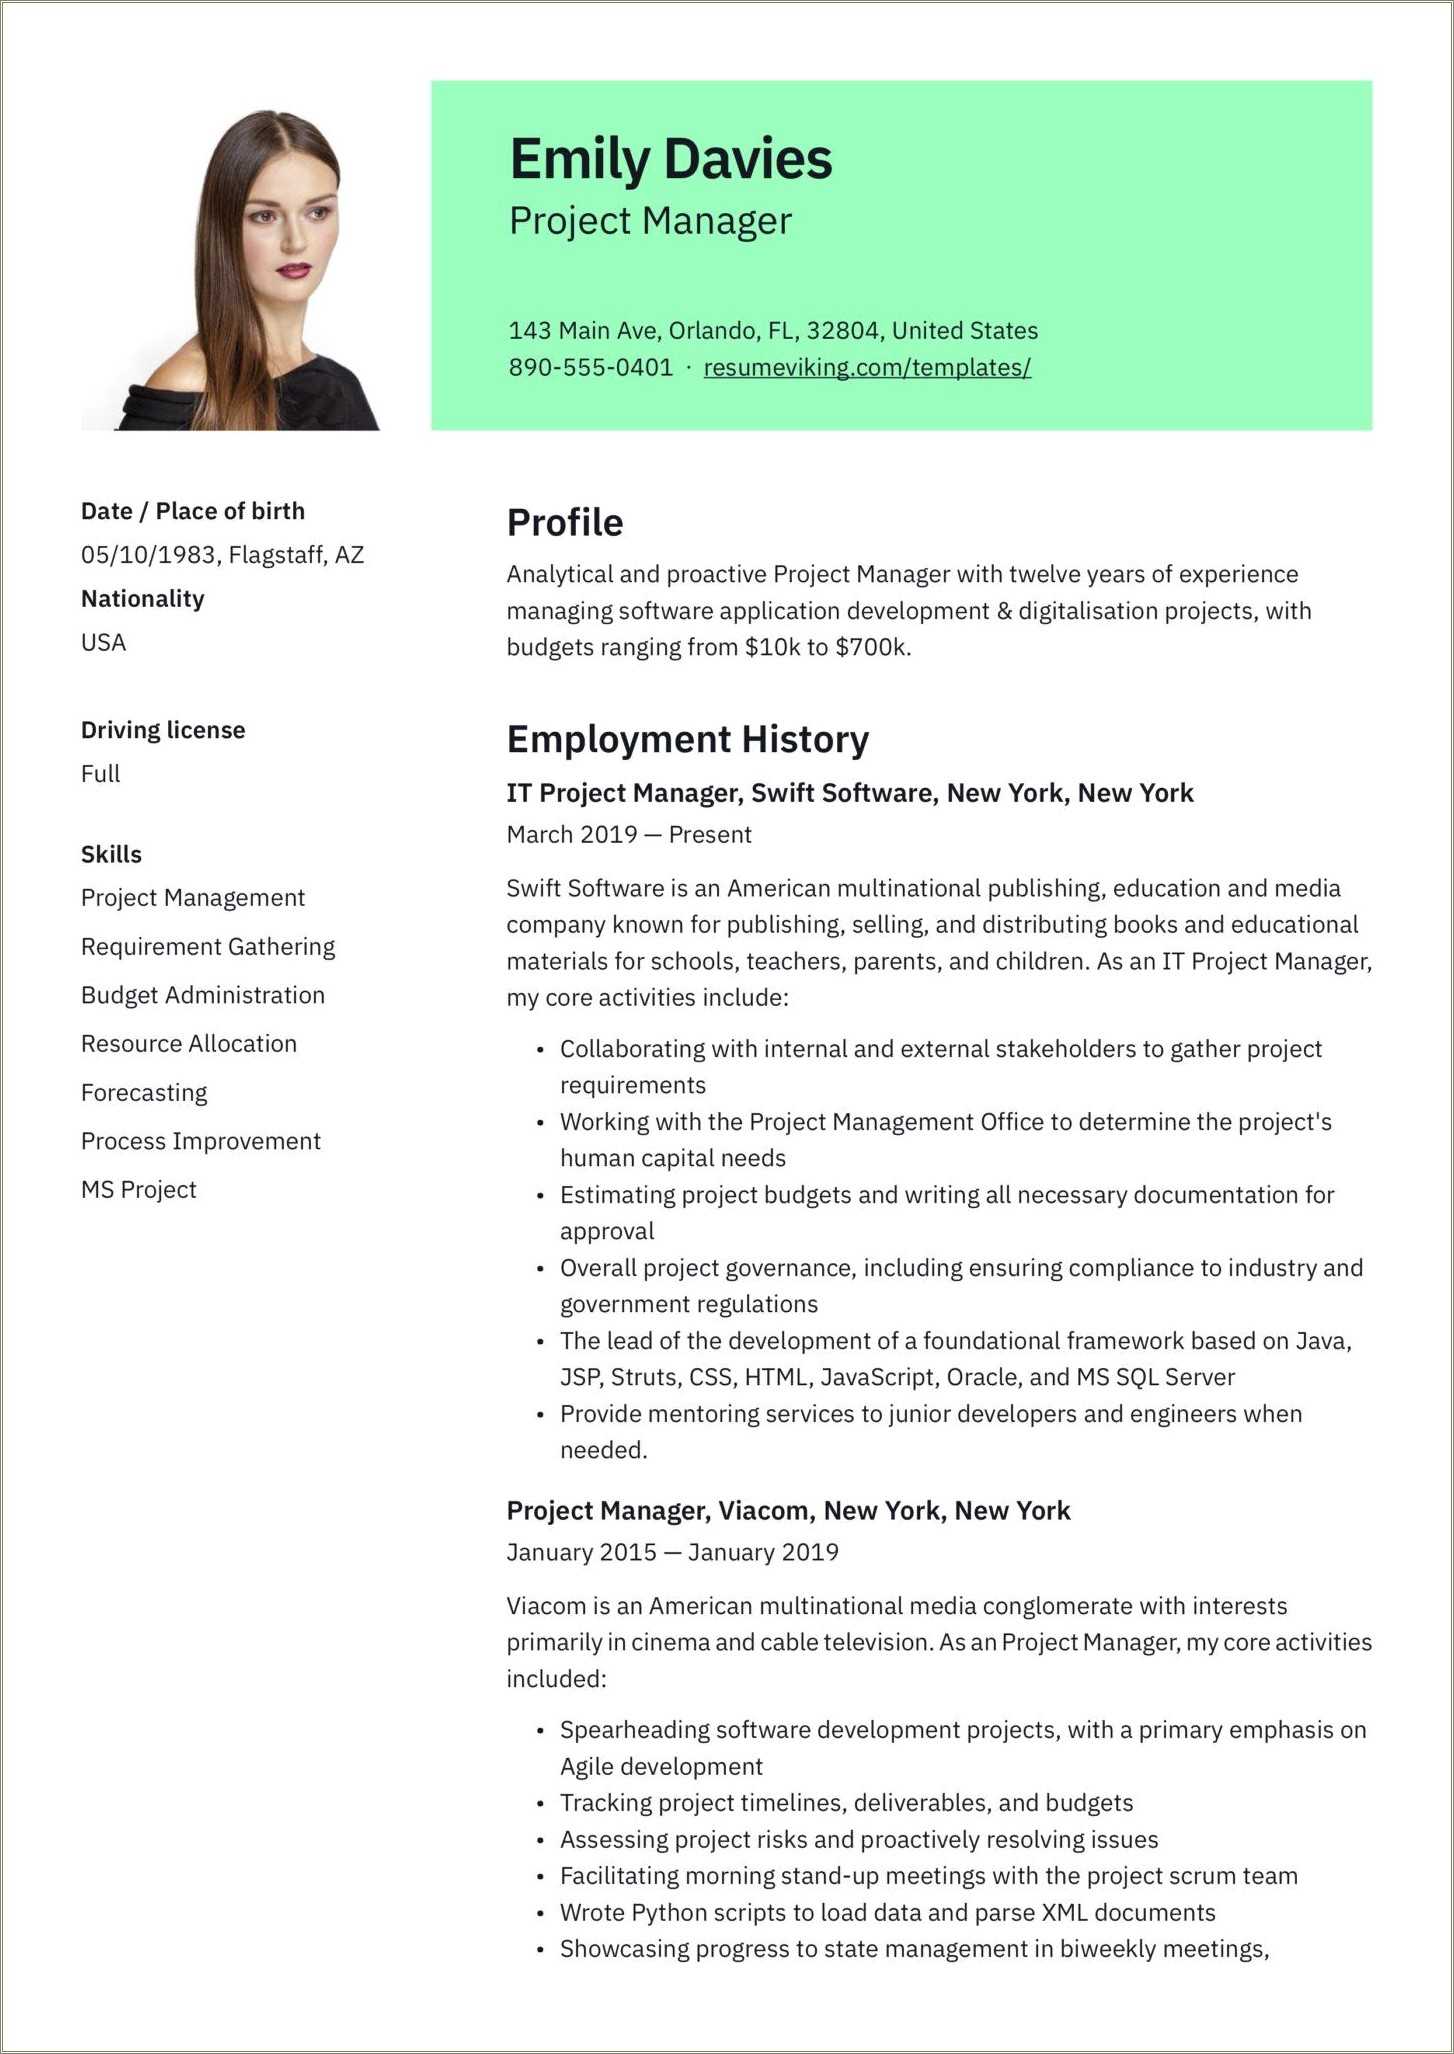 project-manager-resume-format-doc-resume-example-gallery